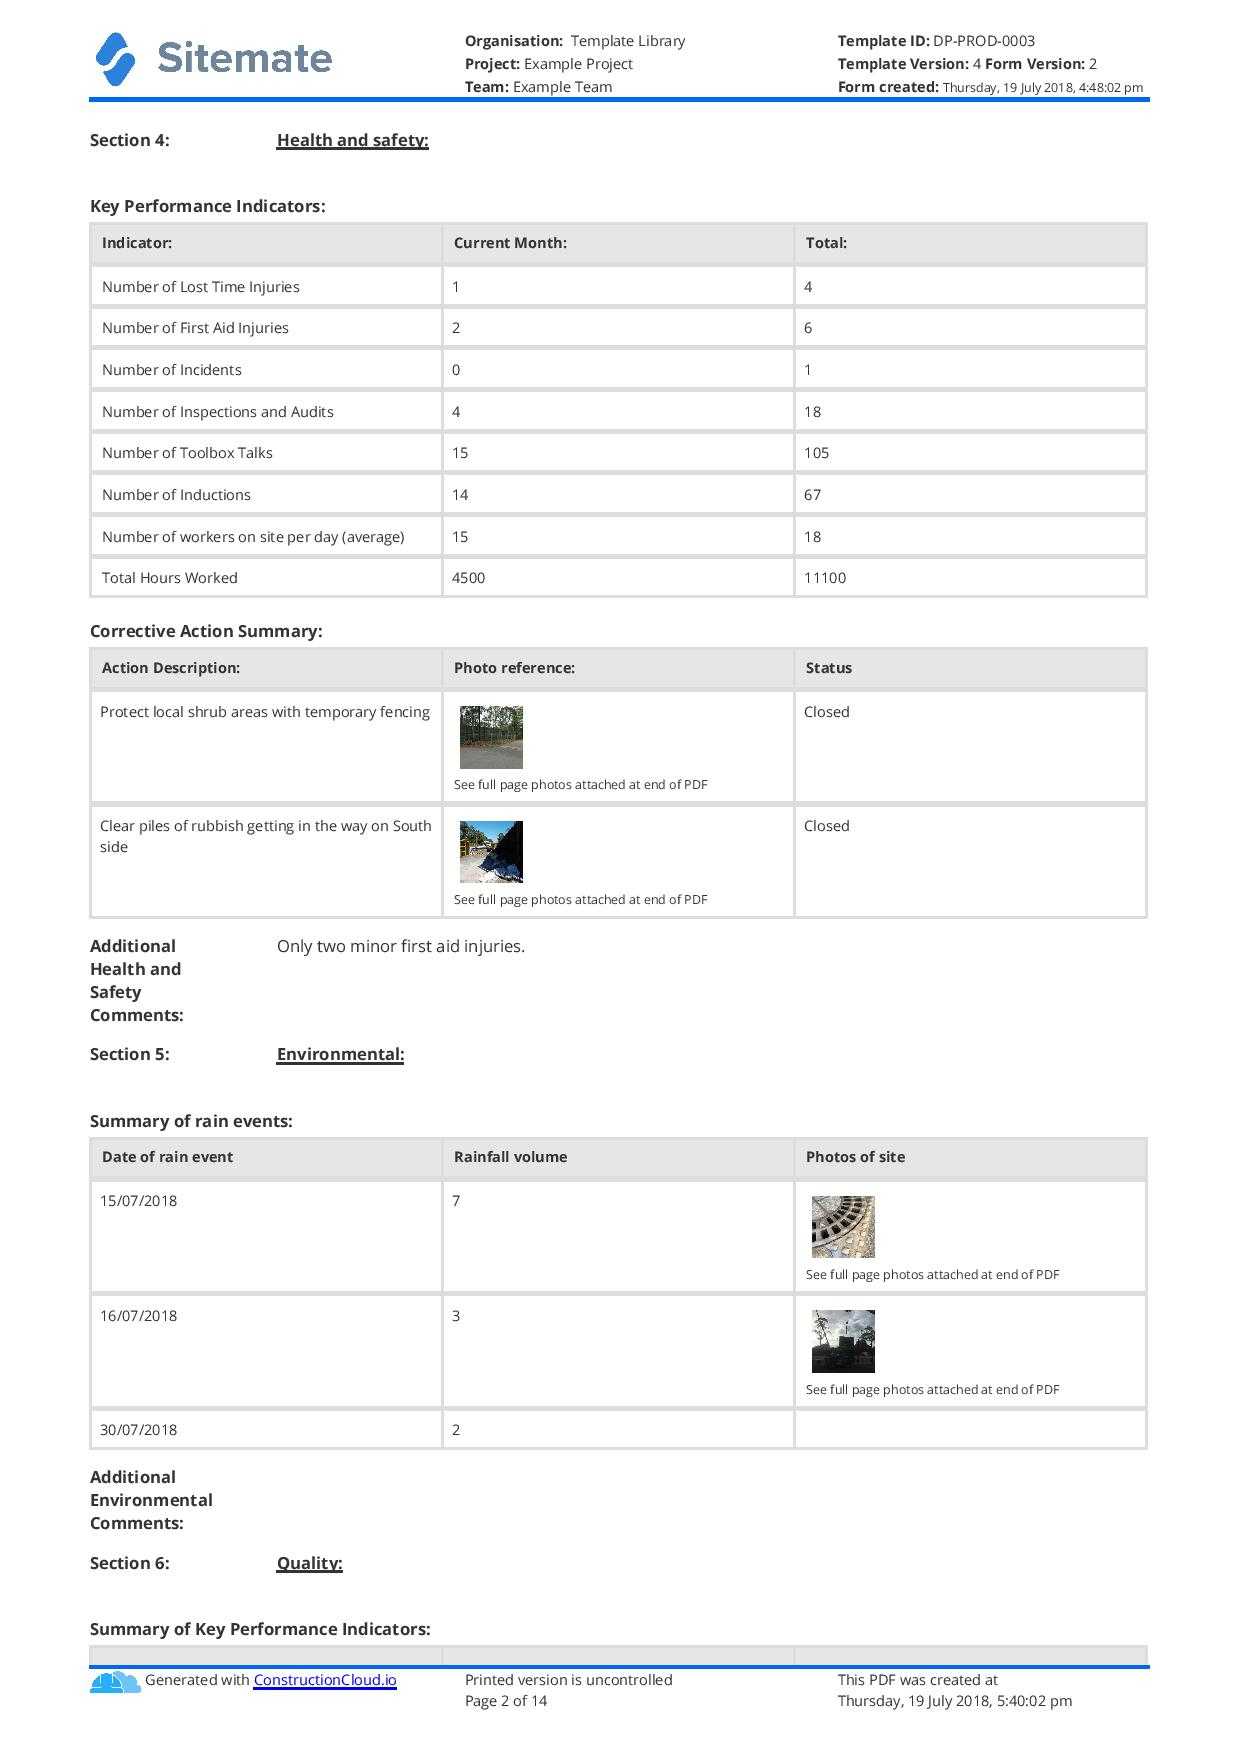 Monthly Construction Progress Report Template: Use This Throughout Daily Status Report Template Xls